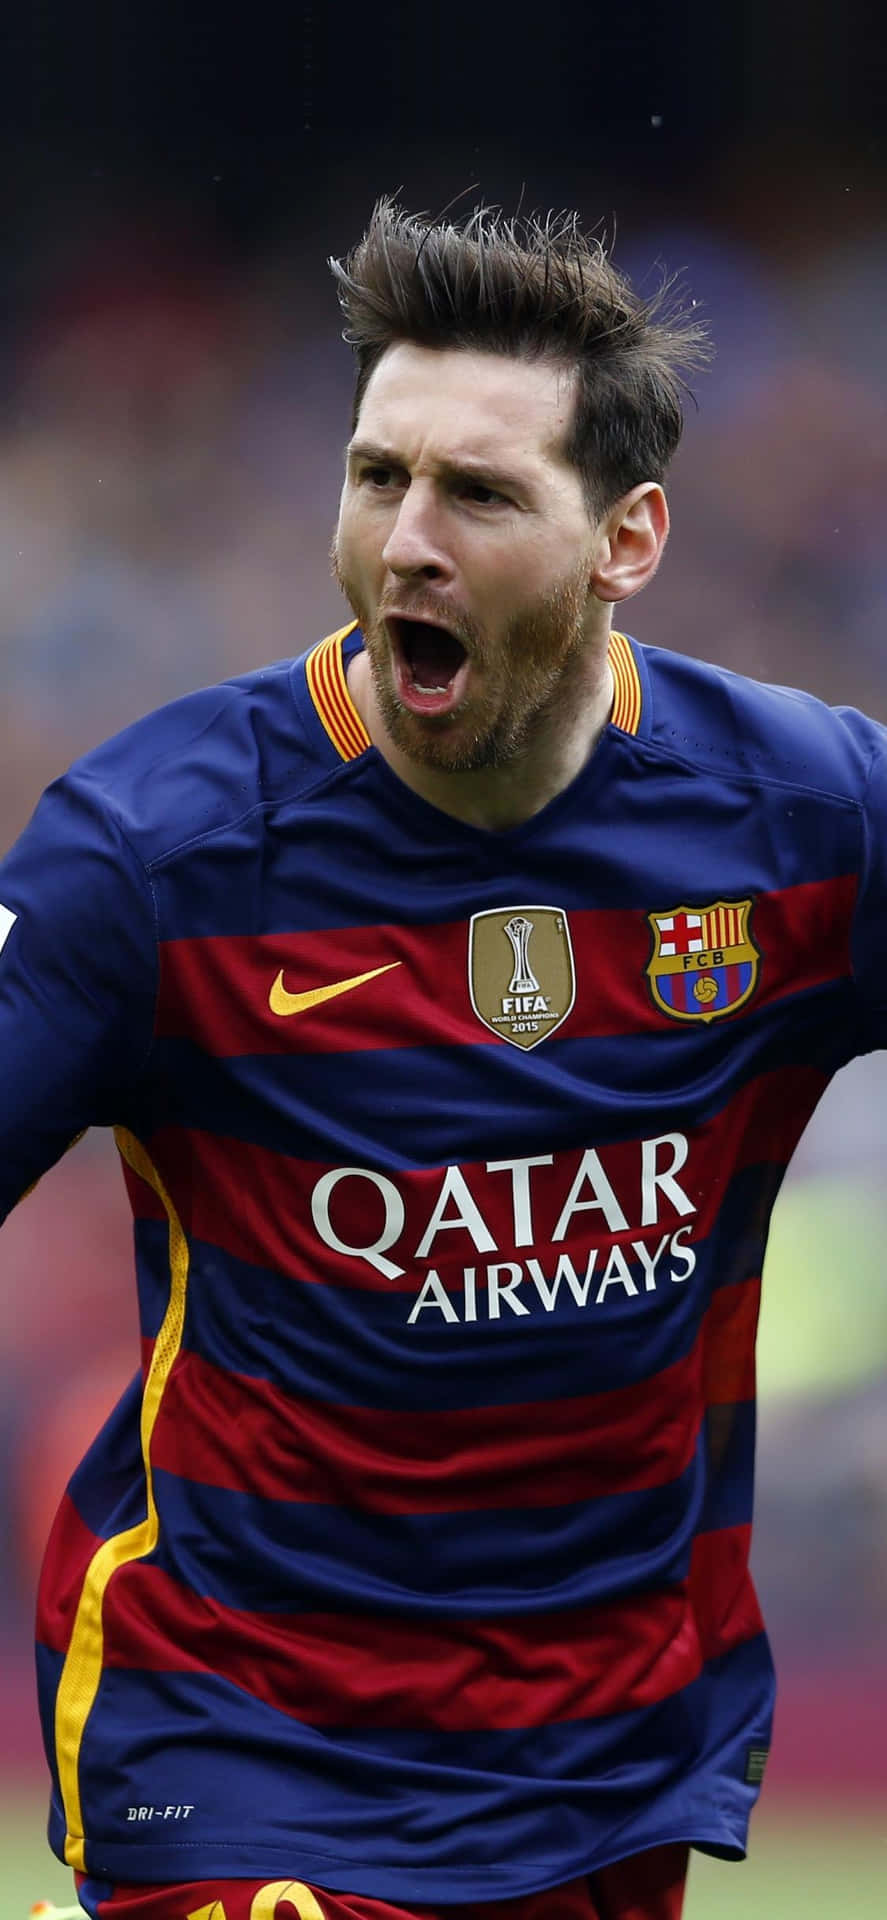 Get Ready For The Games With Messi's New Iphone Wallpaper